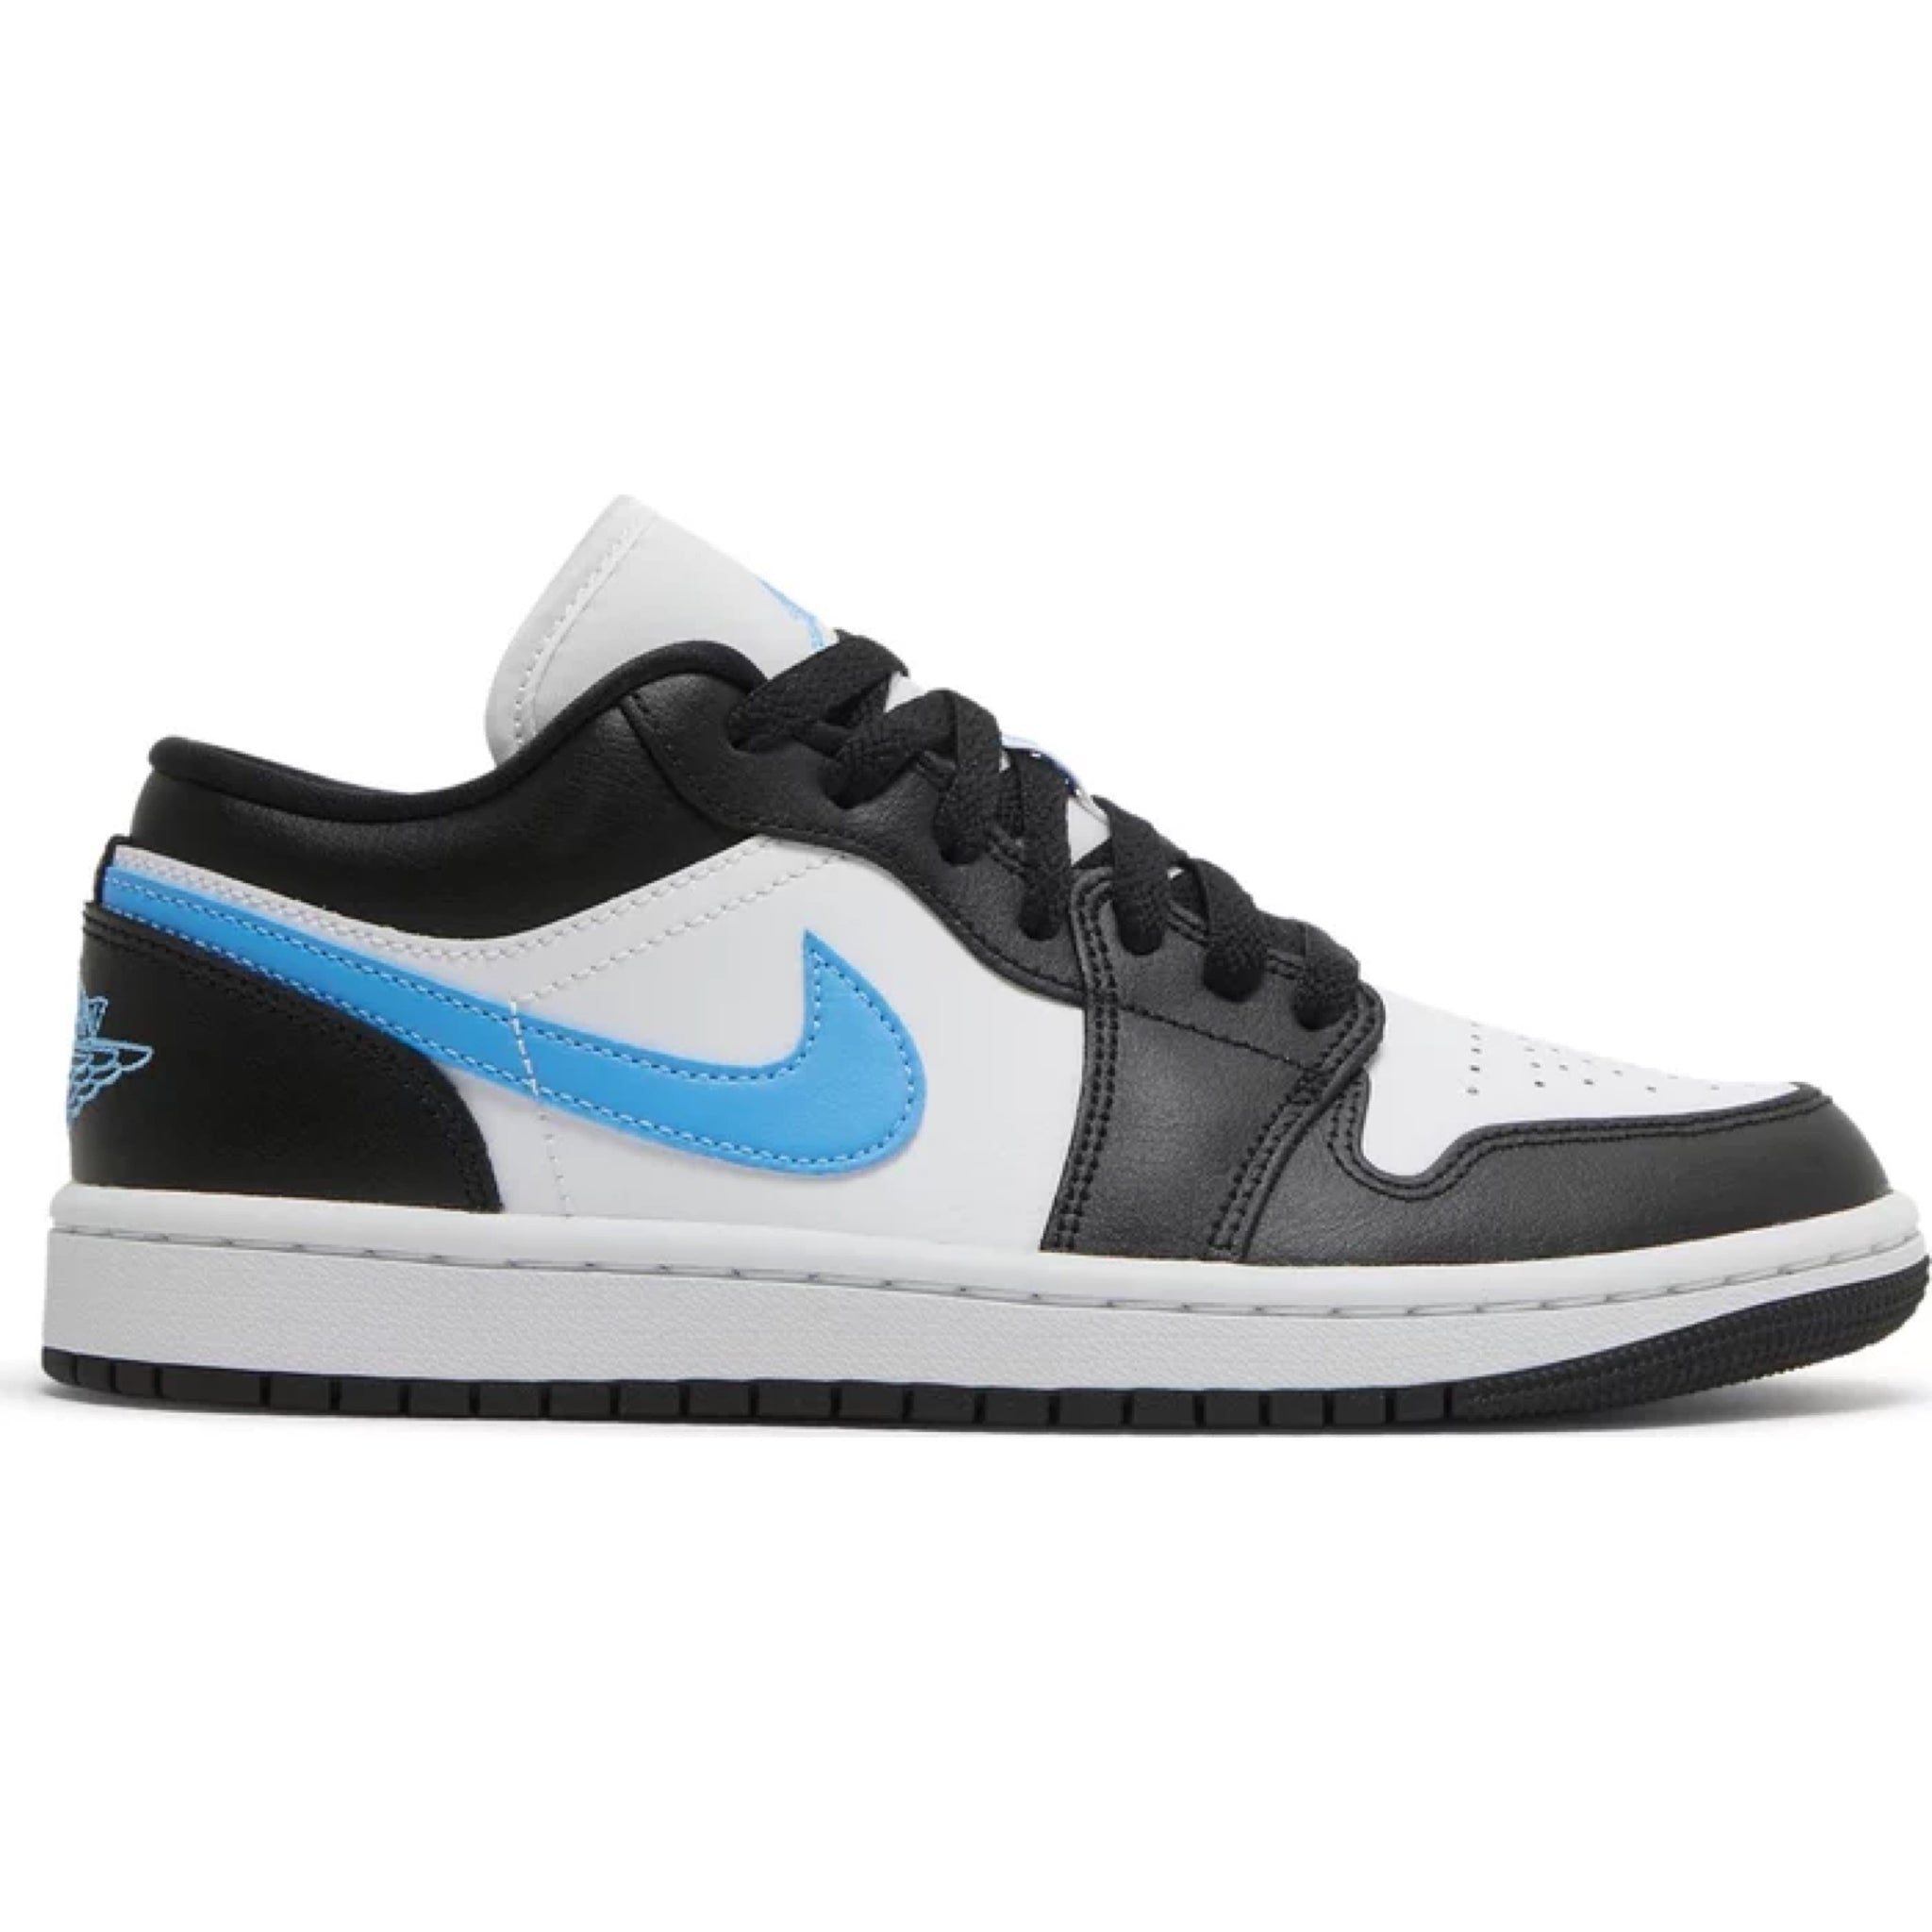 black and white jordans with blue tick